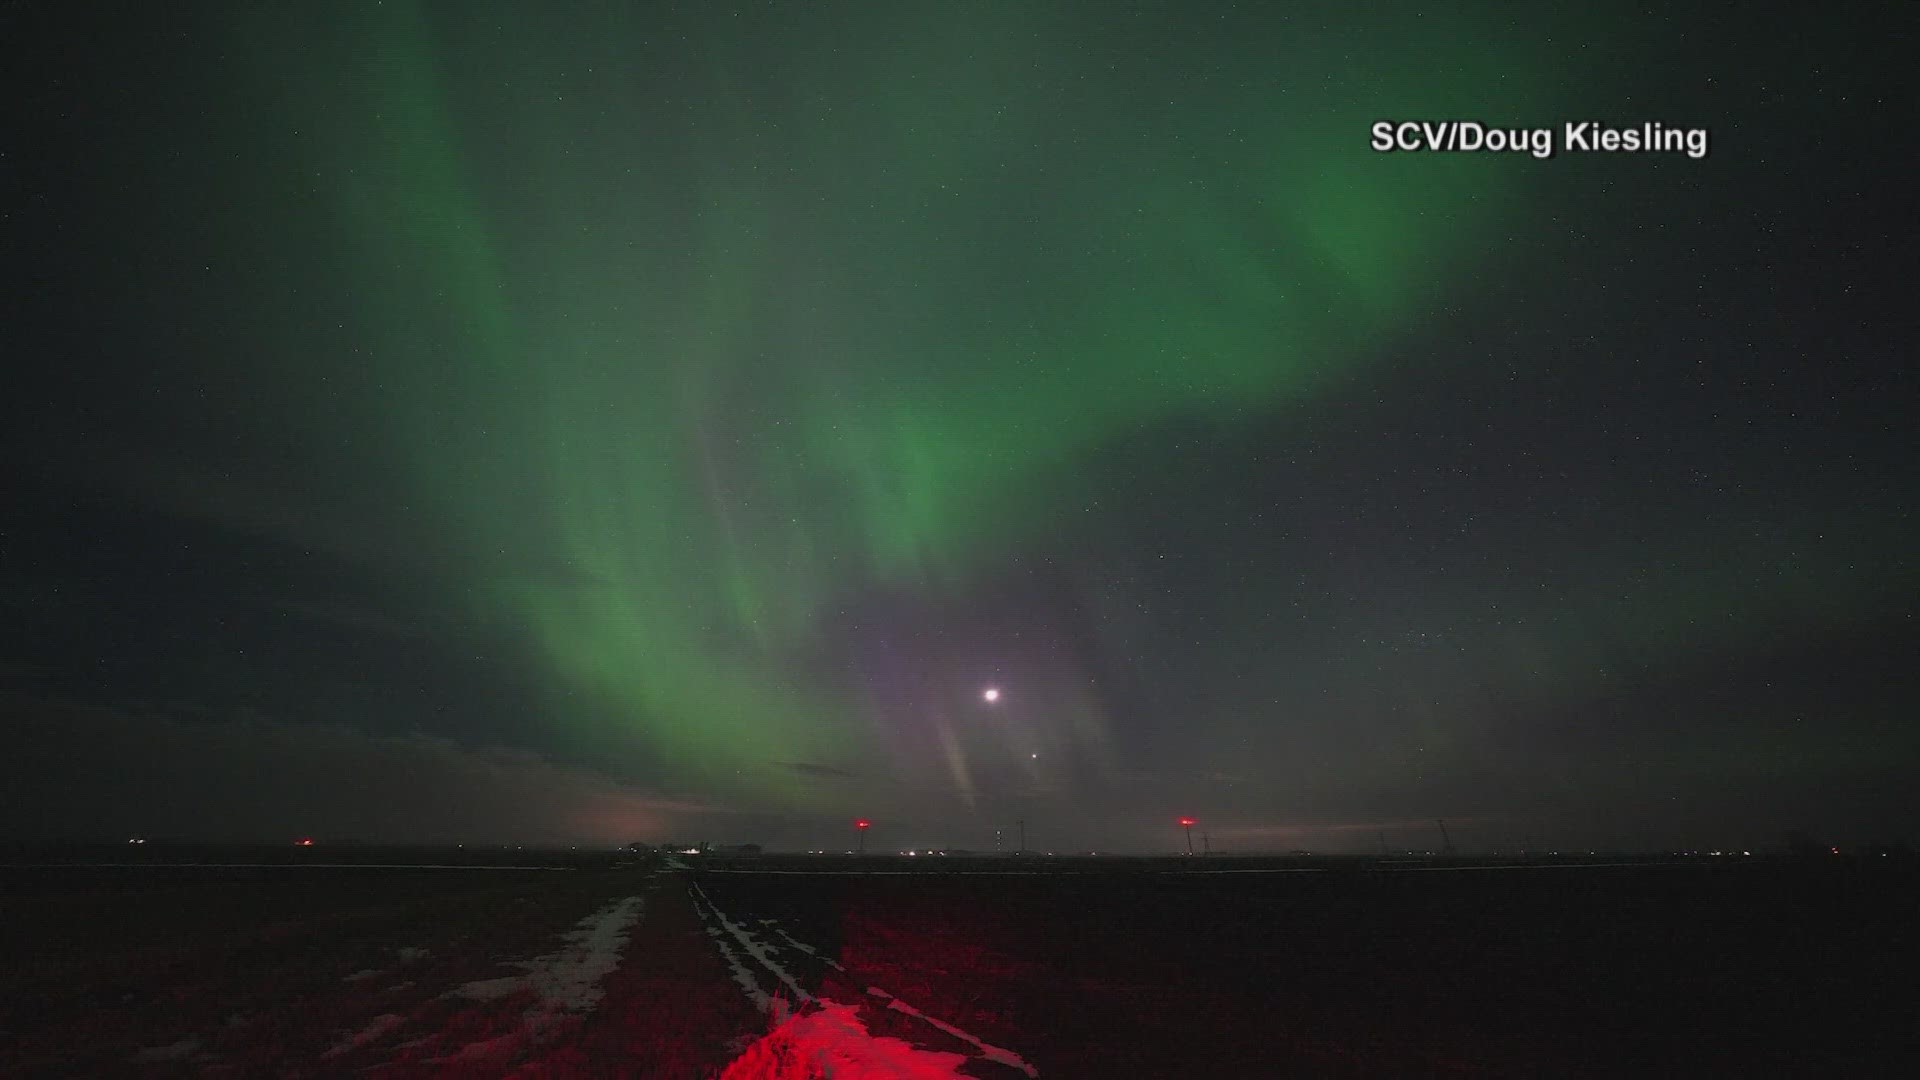 The Northern Lights may shine across Canada tonight - The Weather